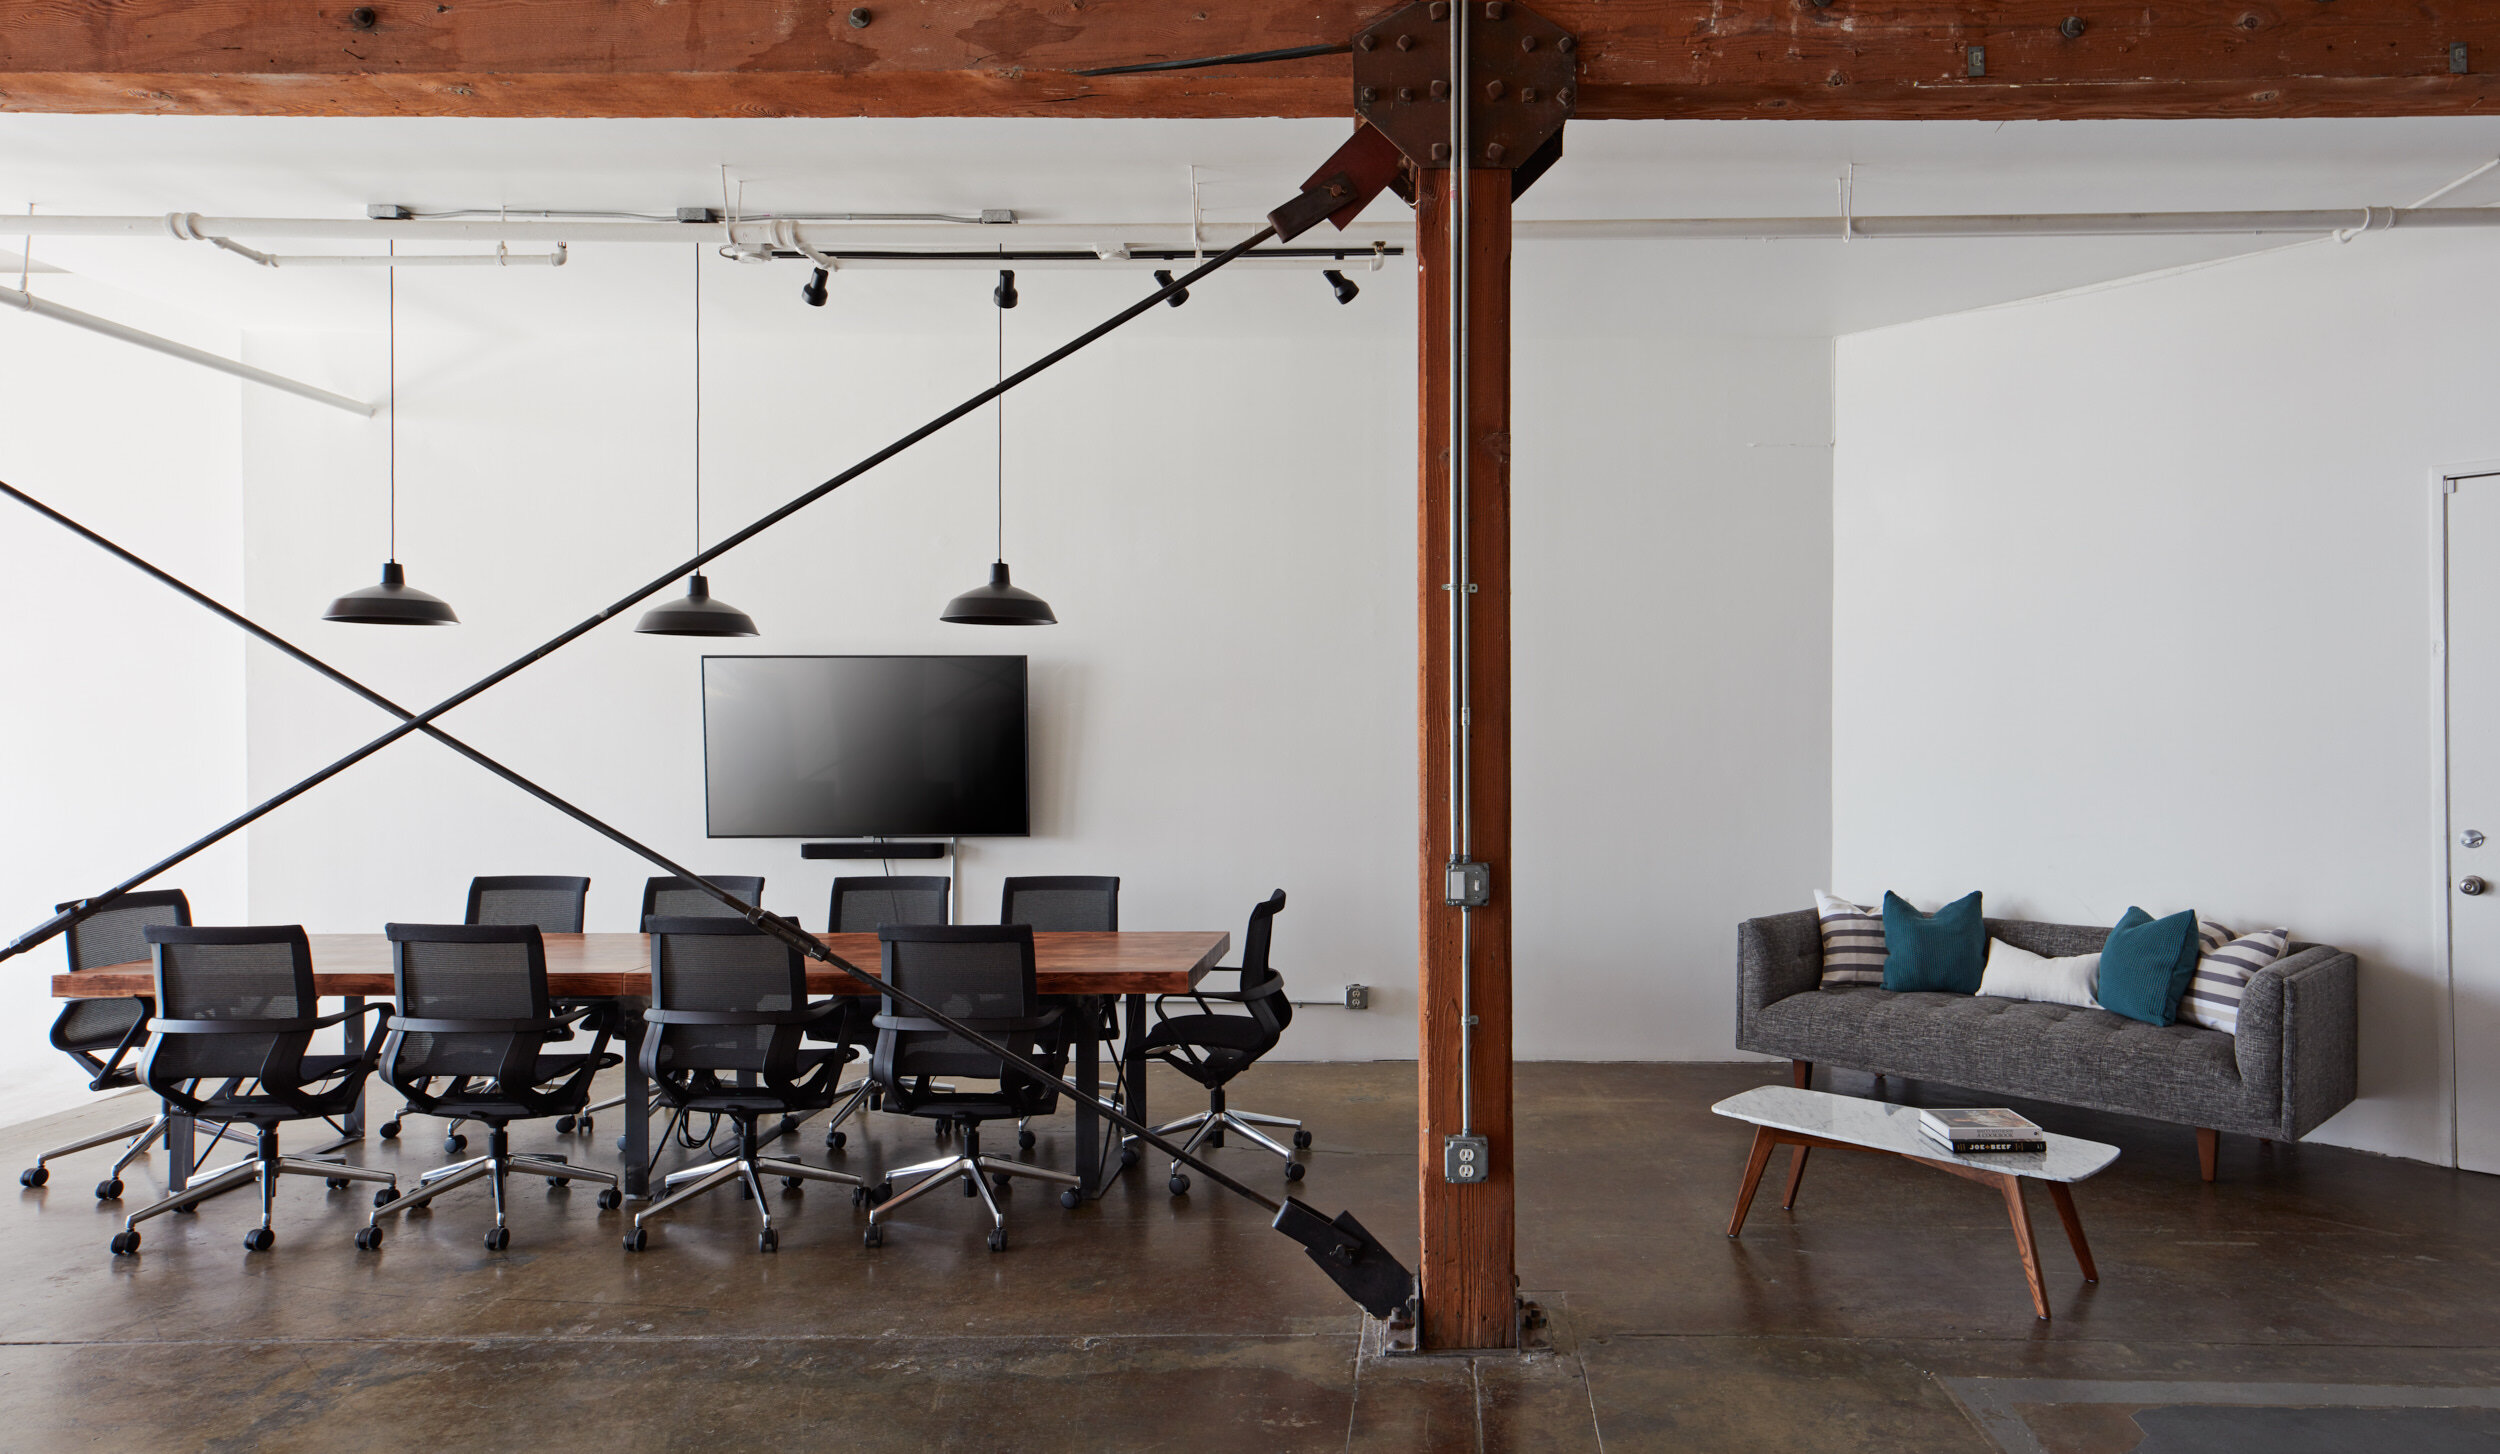 Large client area with conference table and sitting area. Los Angeles photography studio.